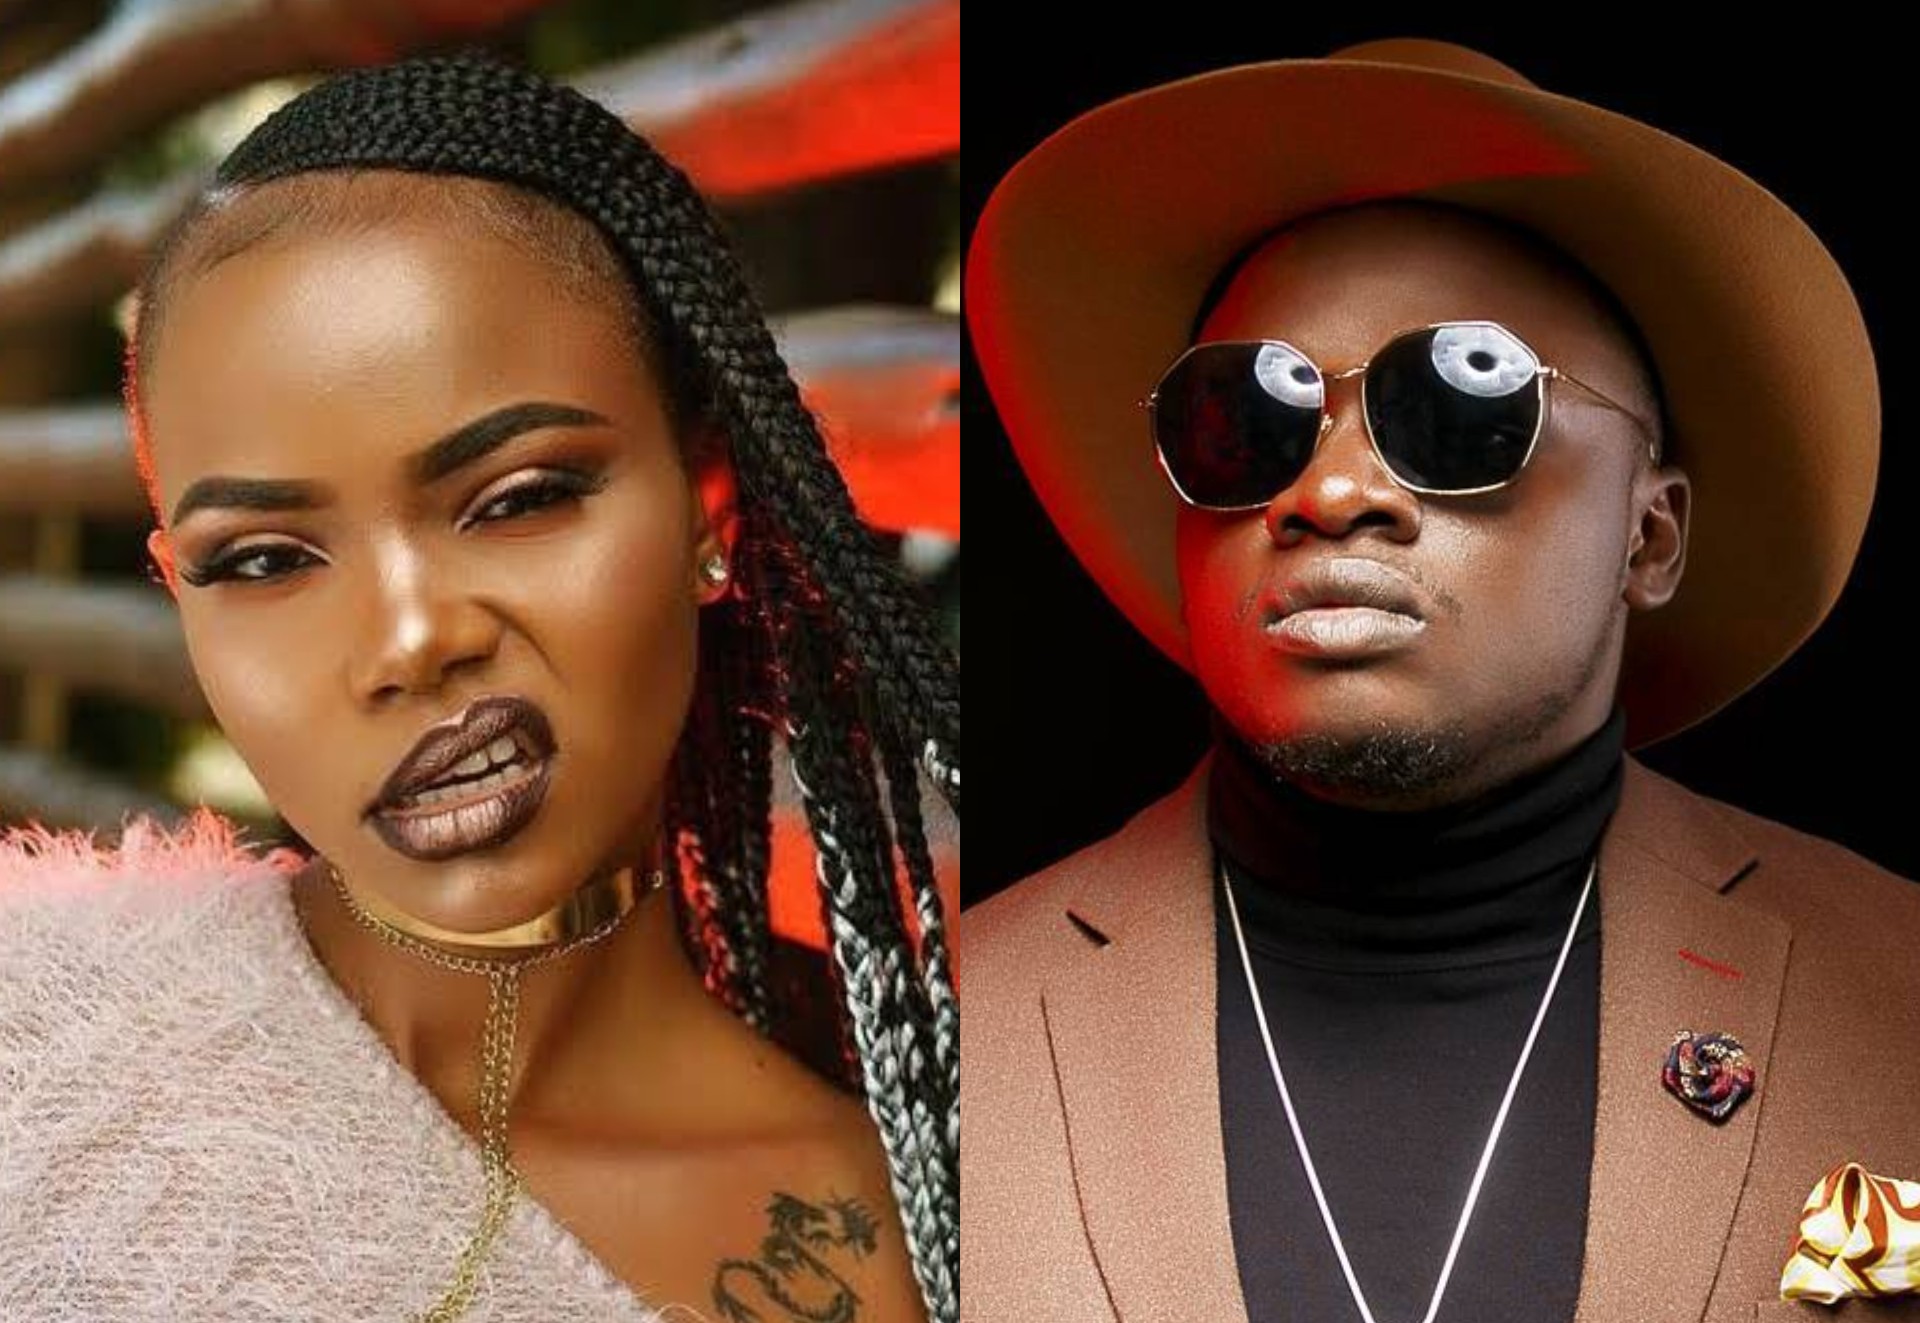 6 collabos between Kenyan and Tanzanian artists that we’d totally love to see